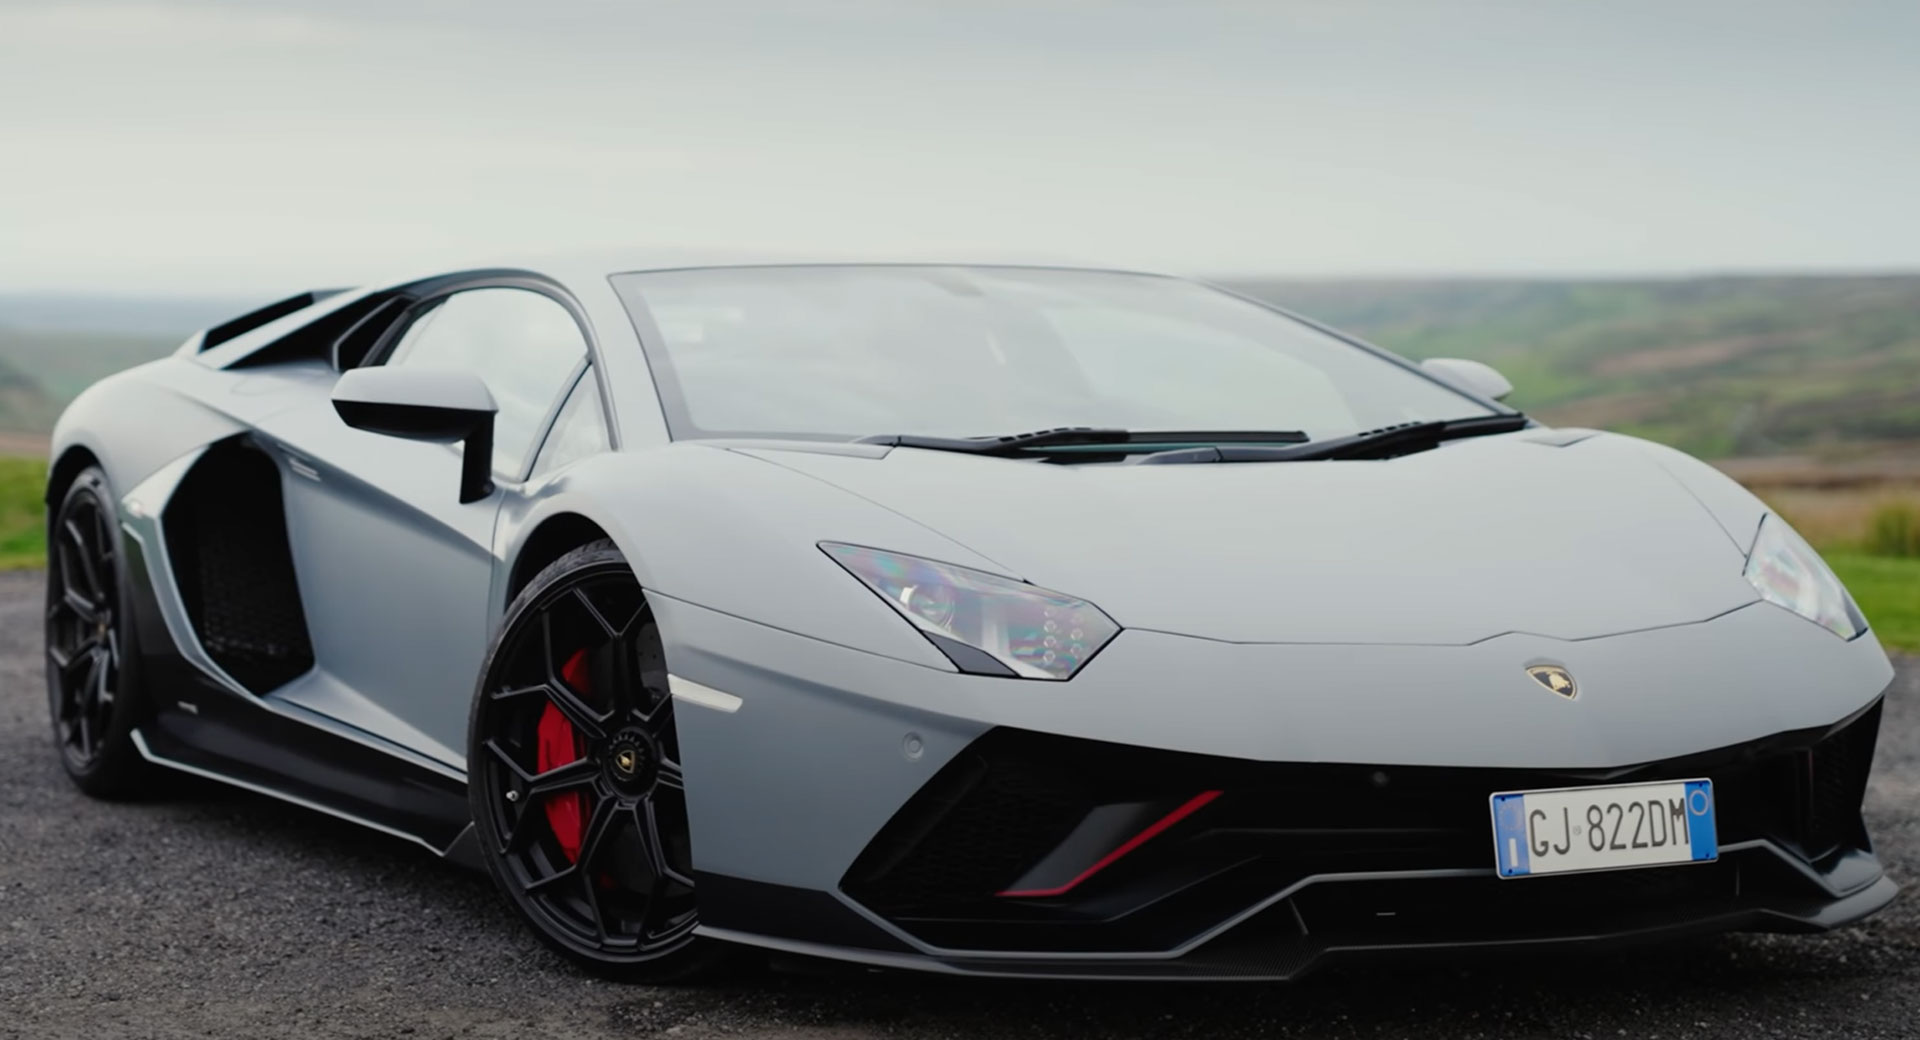 The Lamborghini Aventador Ultimae Is The Final Model But Is It The Best? Auto Recent